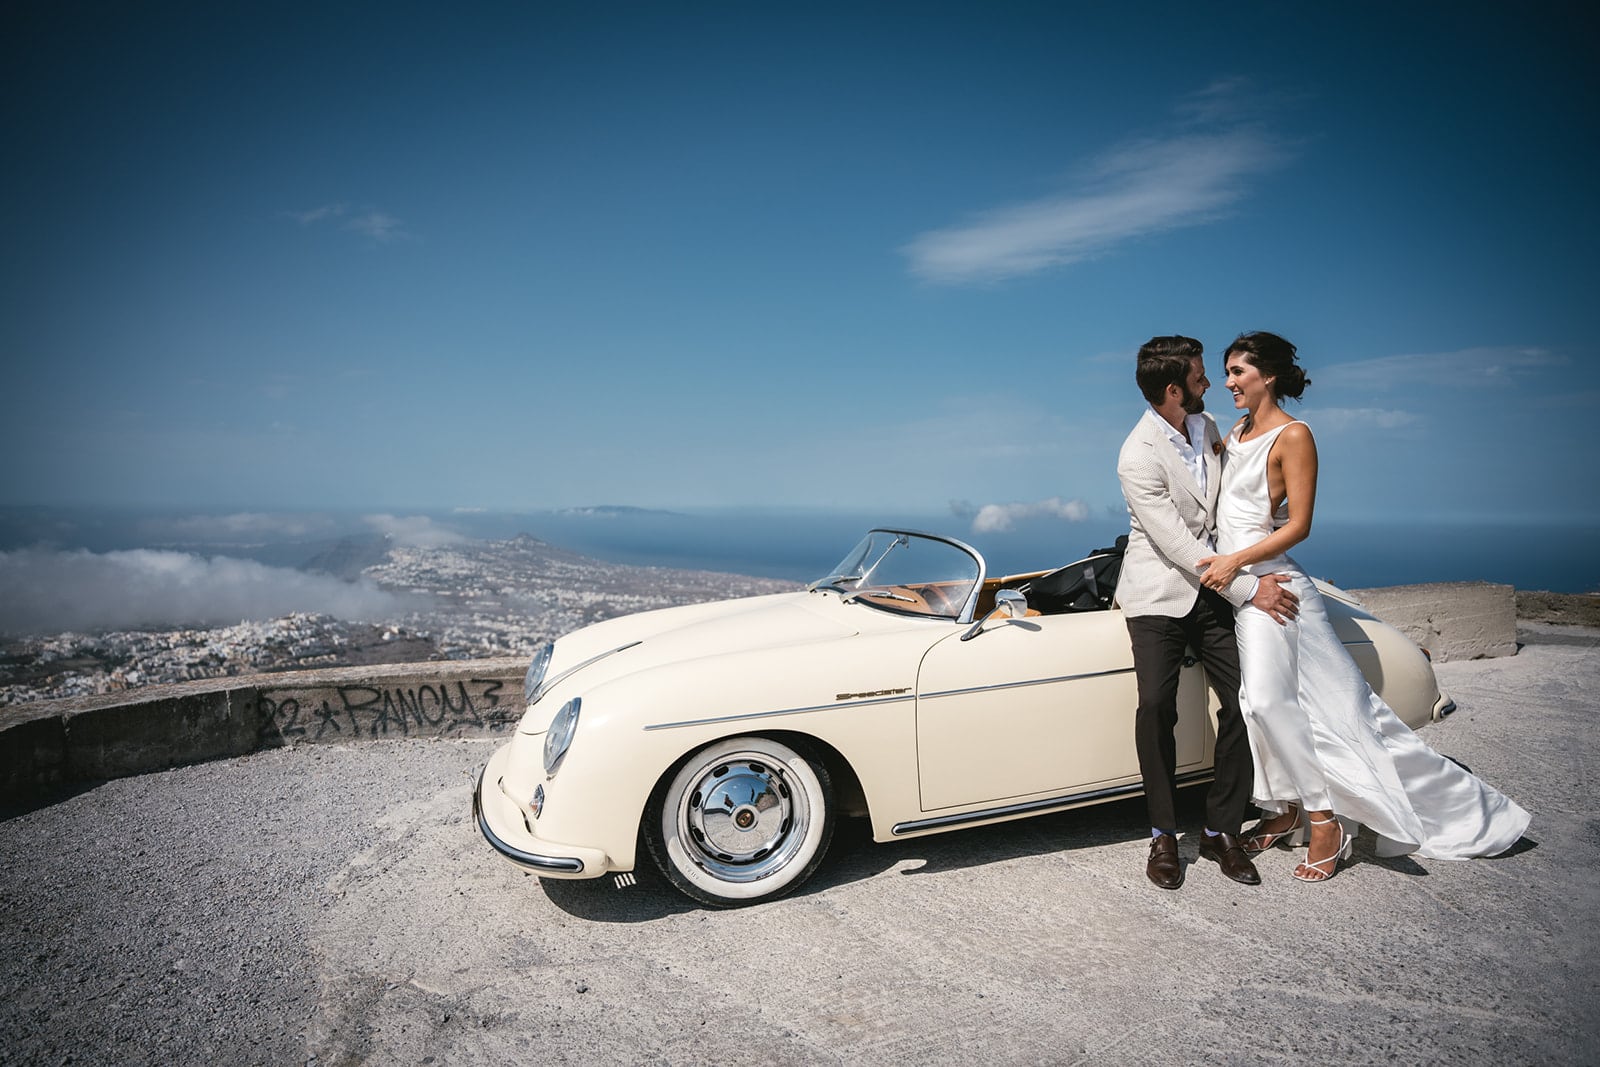 The car, the couple, the crest of Santorini—a tableau of elopement elegance